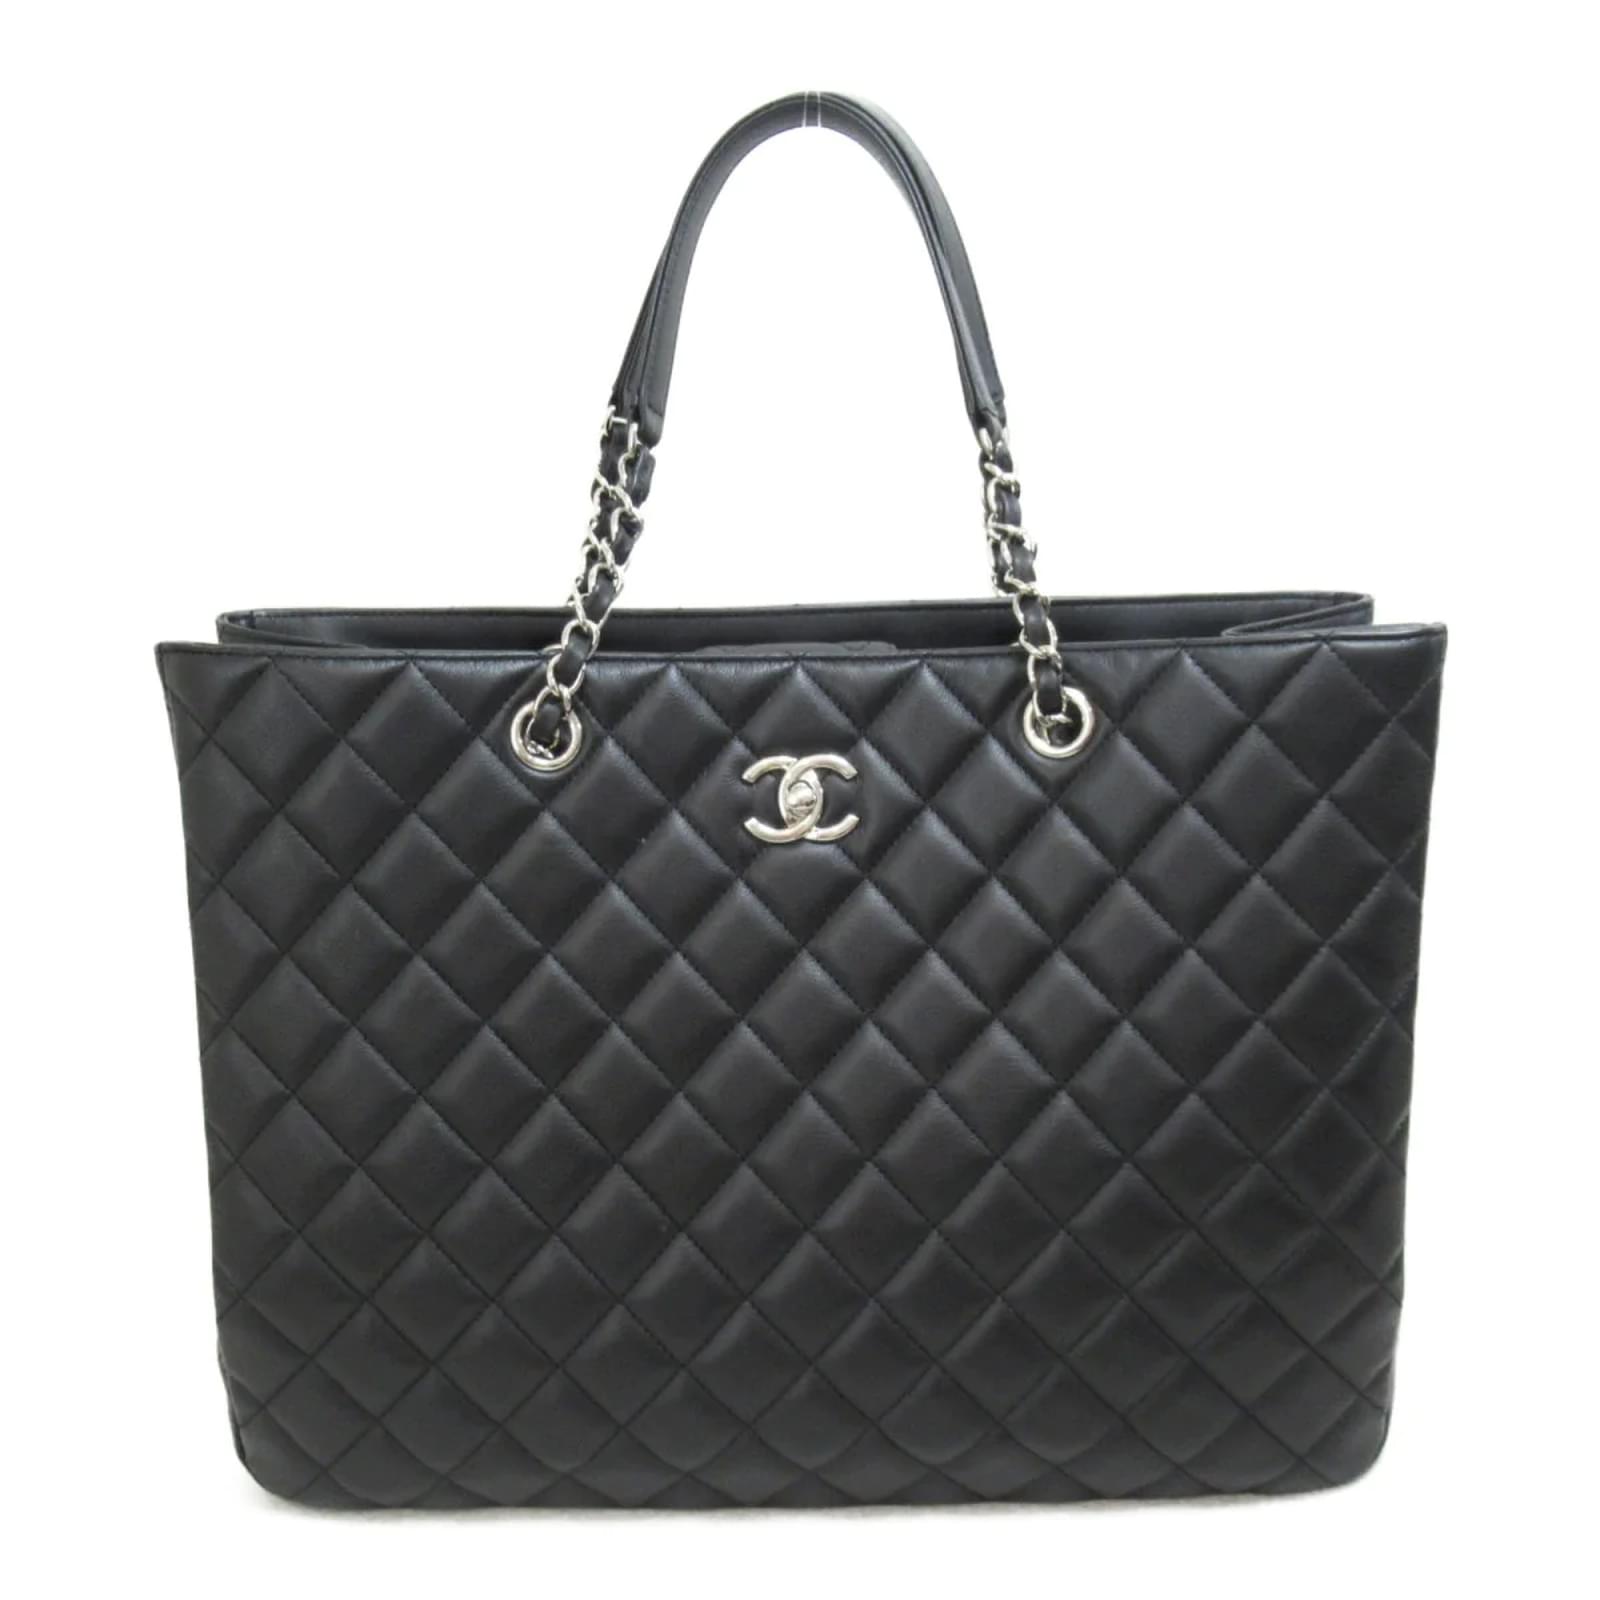 Chanel CC Quilted Leather Chain Tote Bag Black Pony-style calfskin